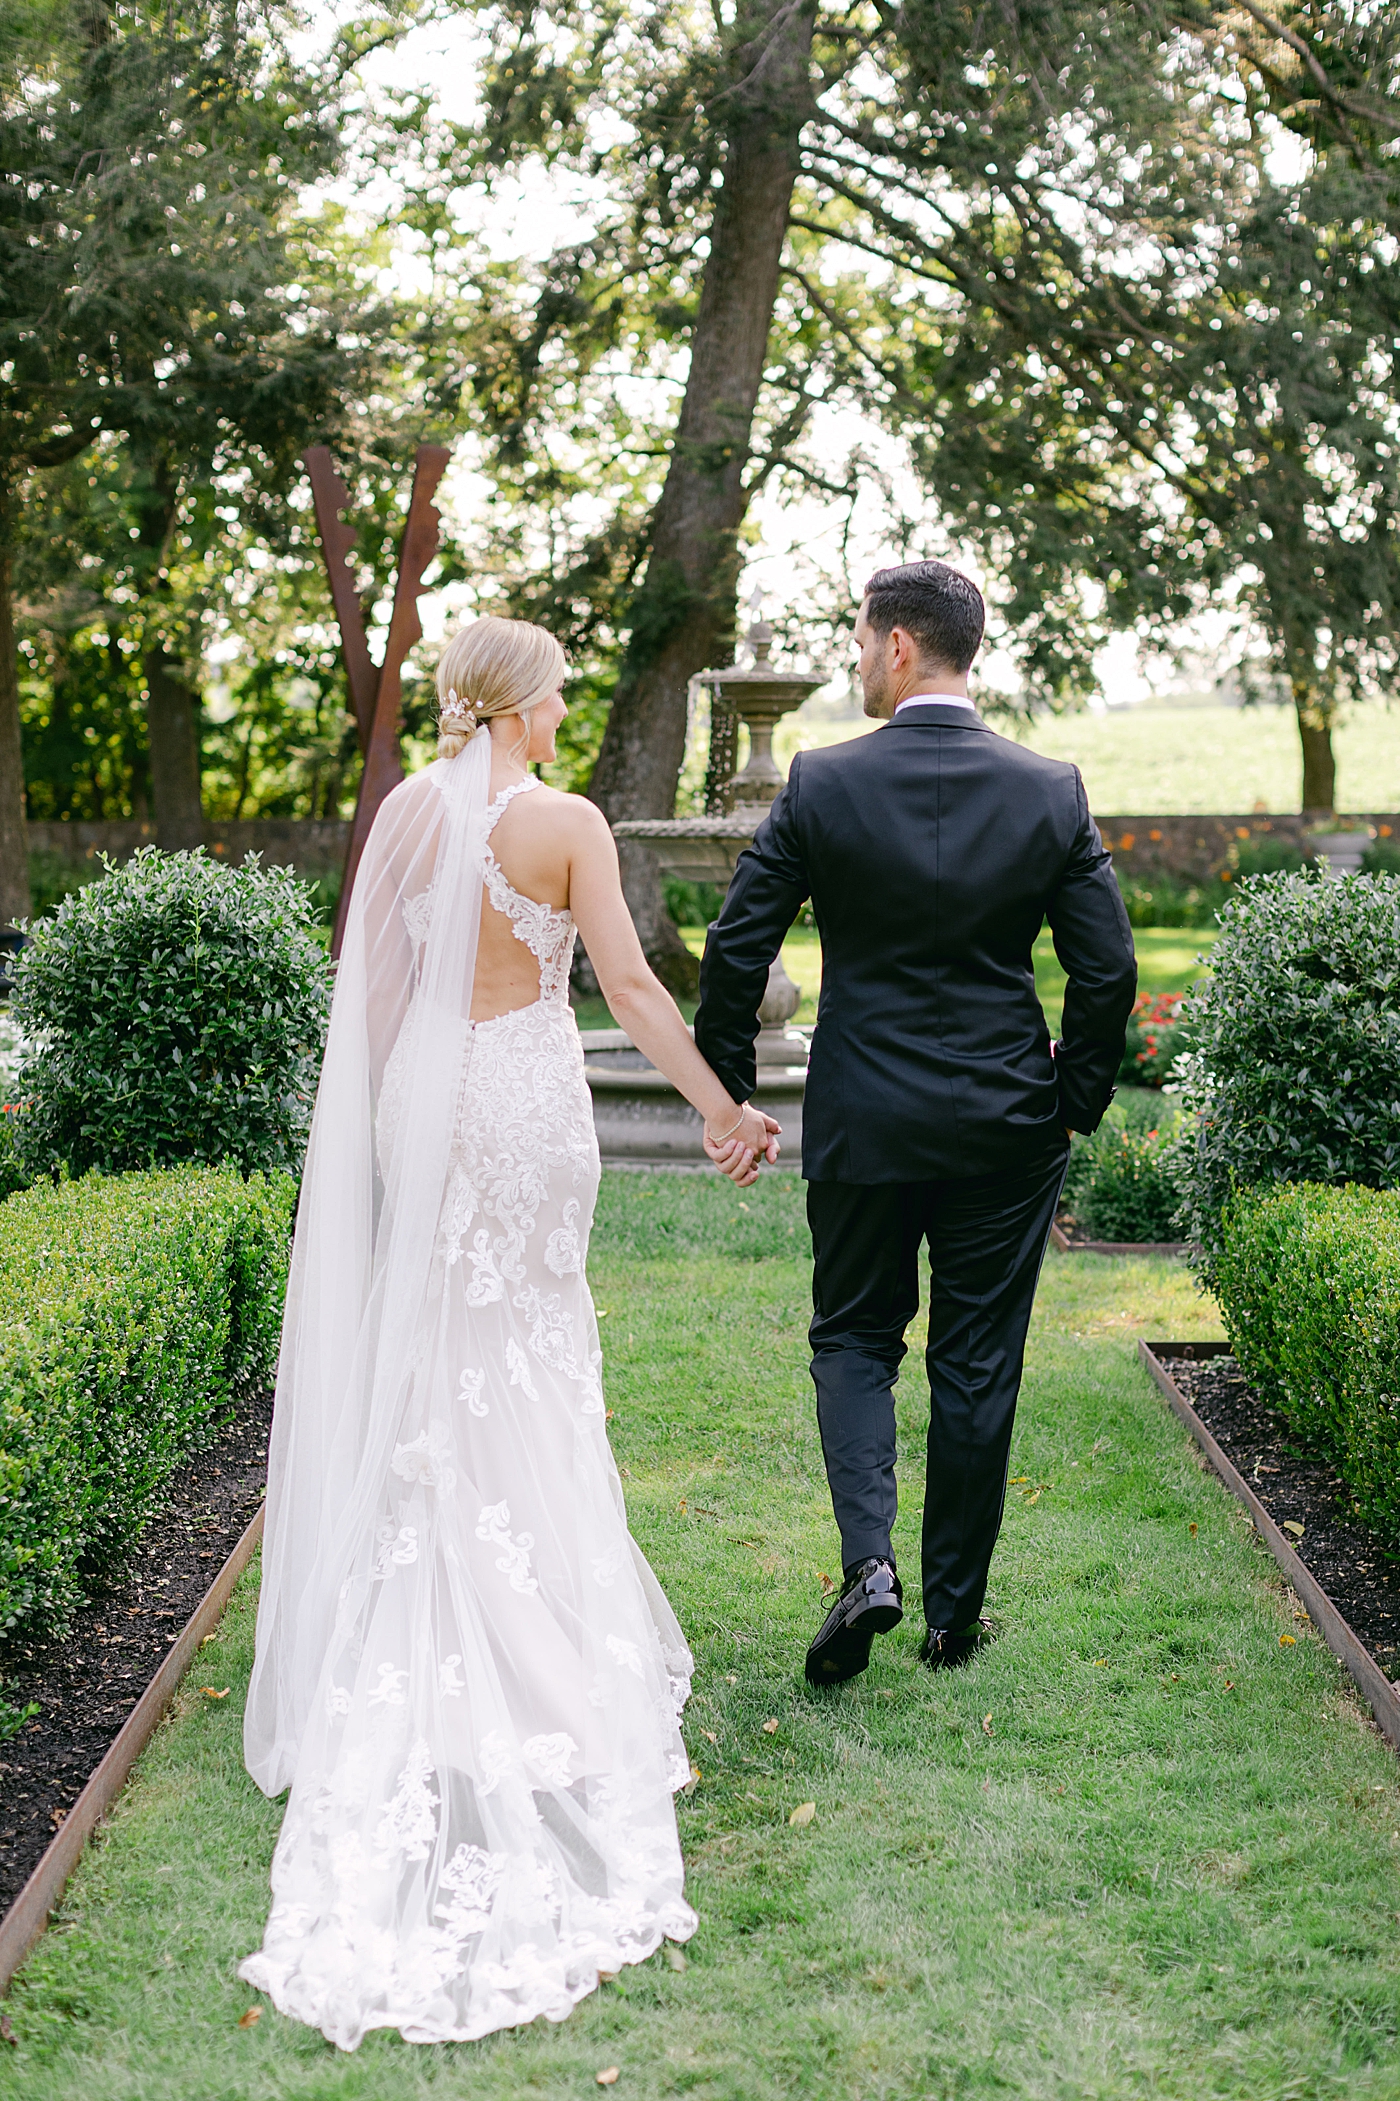 Bride and groom walking through a garden during Hotel du Village Wedding | Image by Hope Helmuth Photography